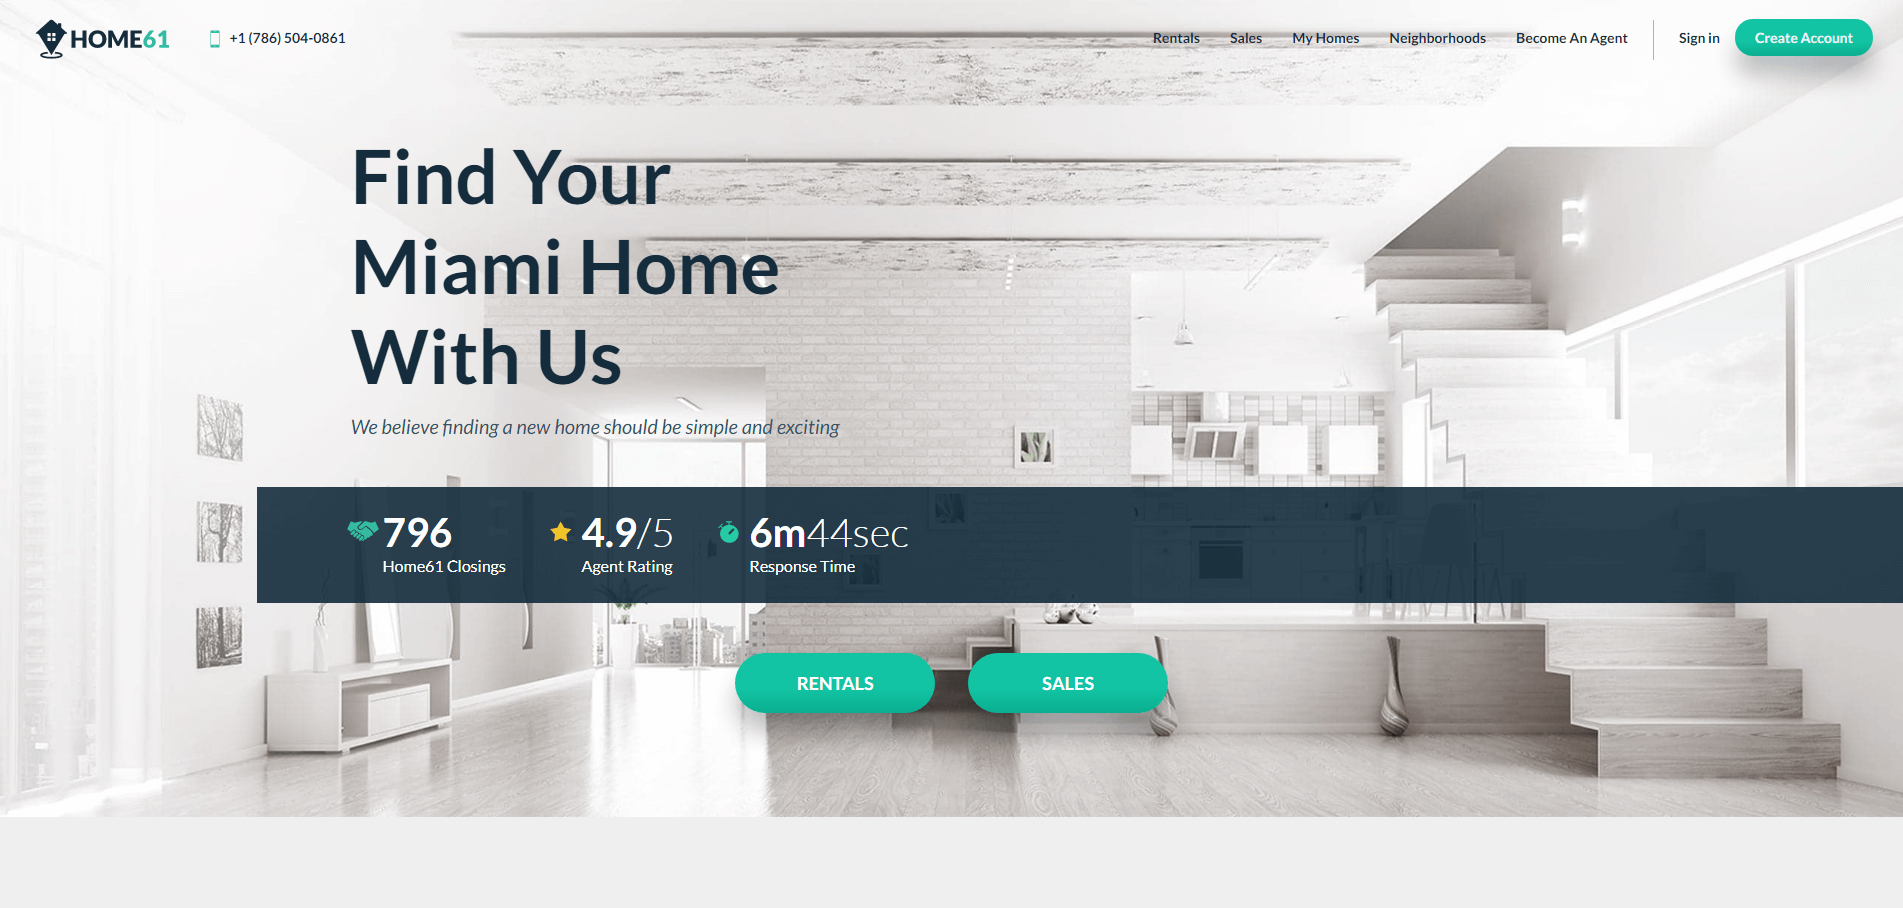  Incredible!  We reviewed and ranked each site, 1-101.  Here's home61.com.  Curious who made the cut? 